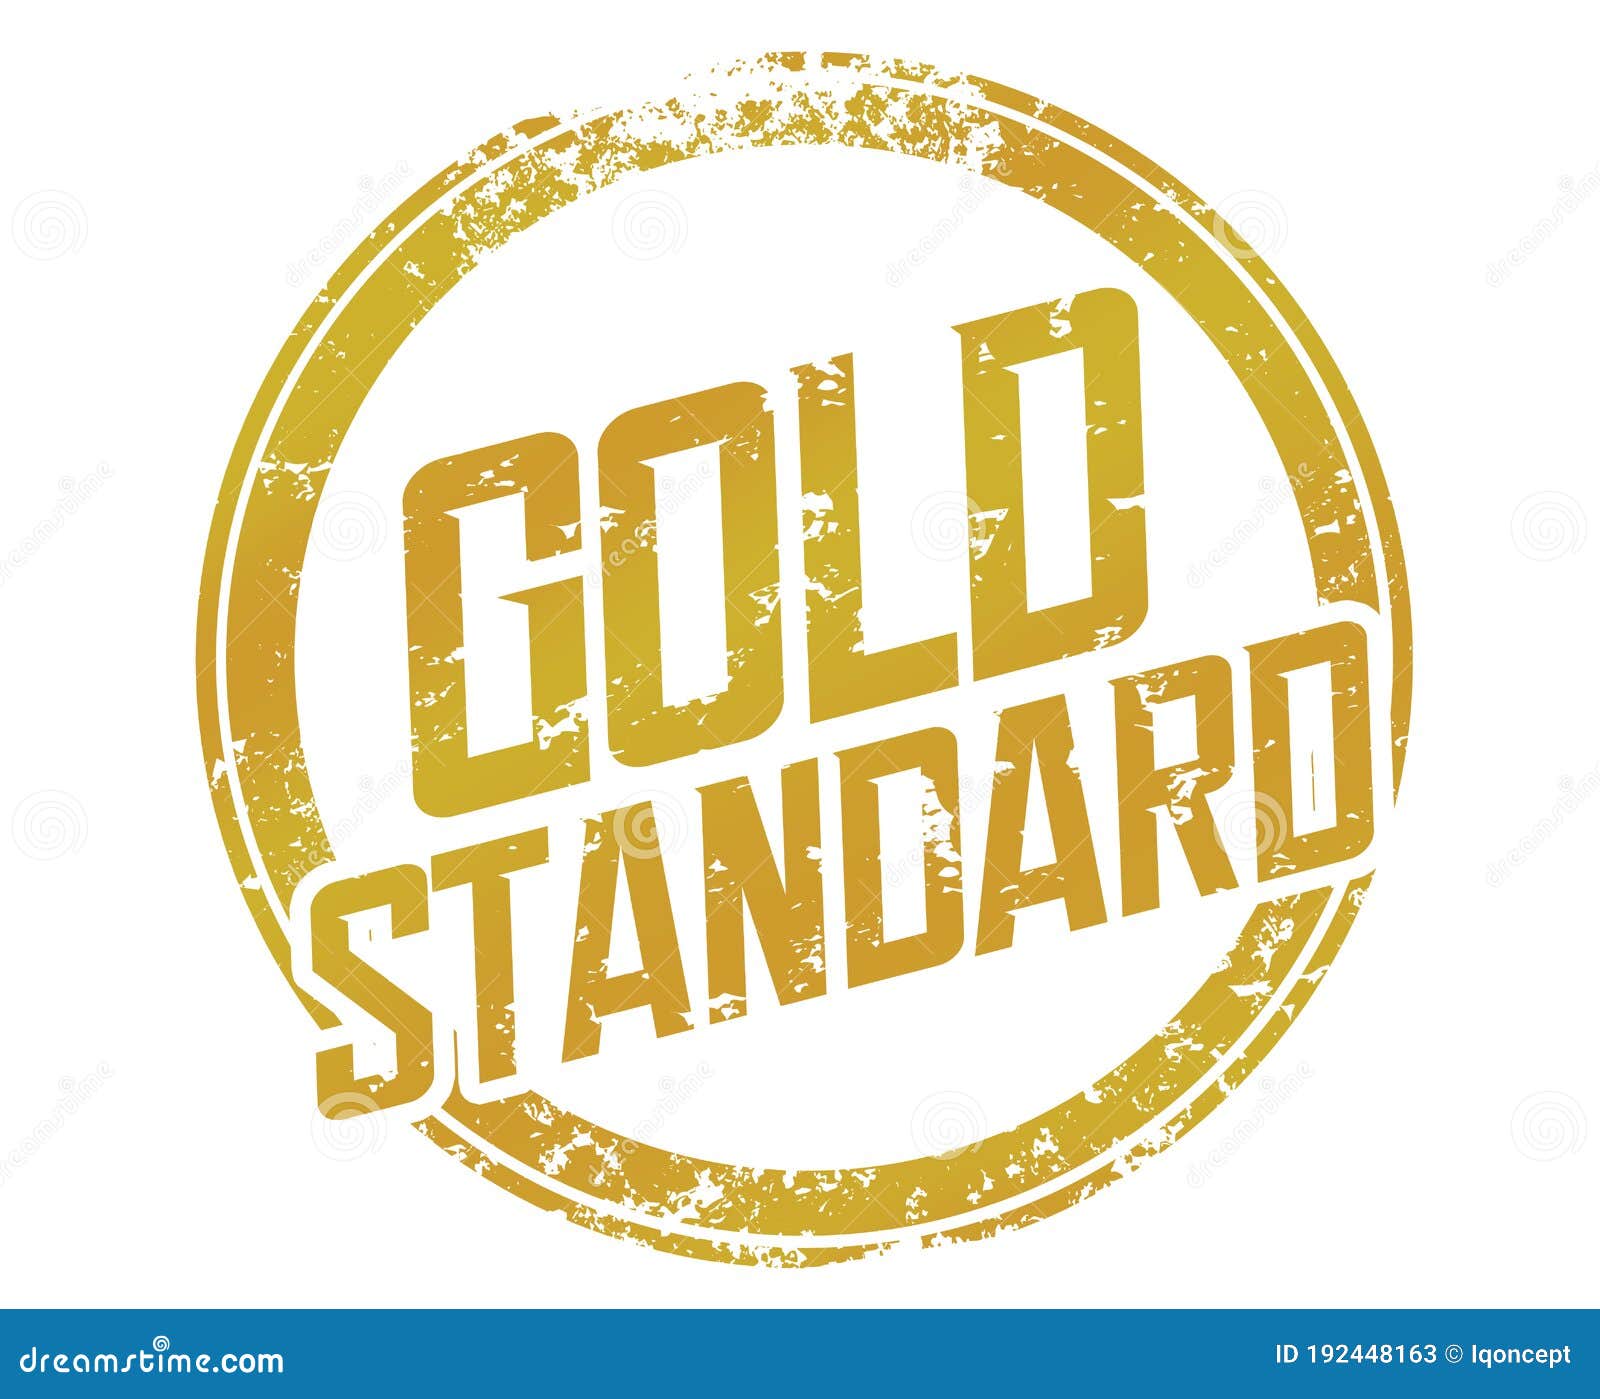 gold standard stamp best practice example comparison measure performance 